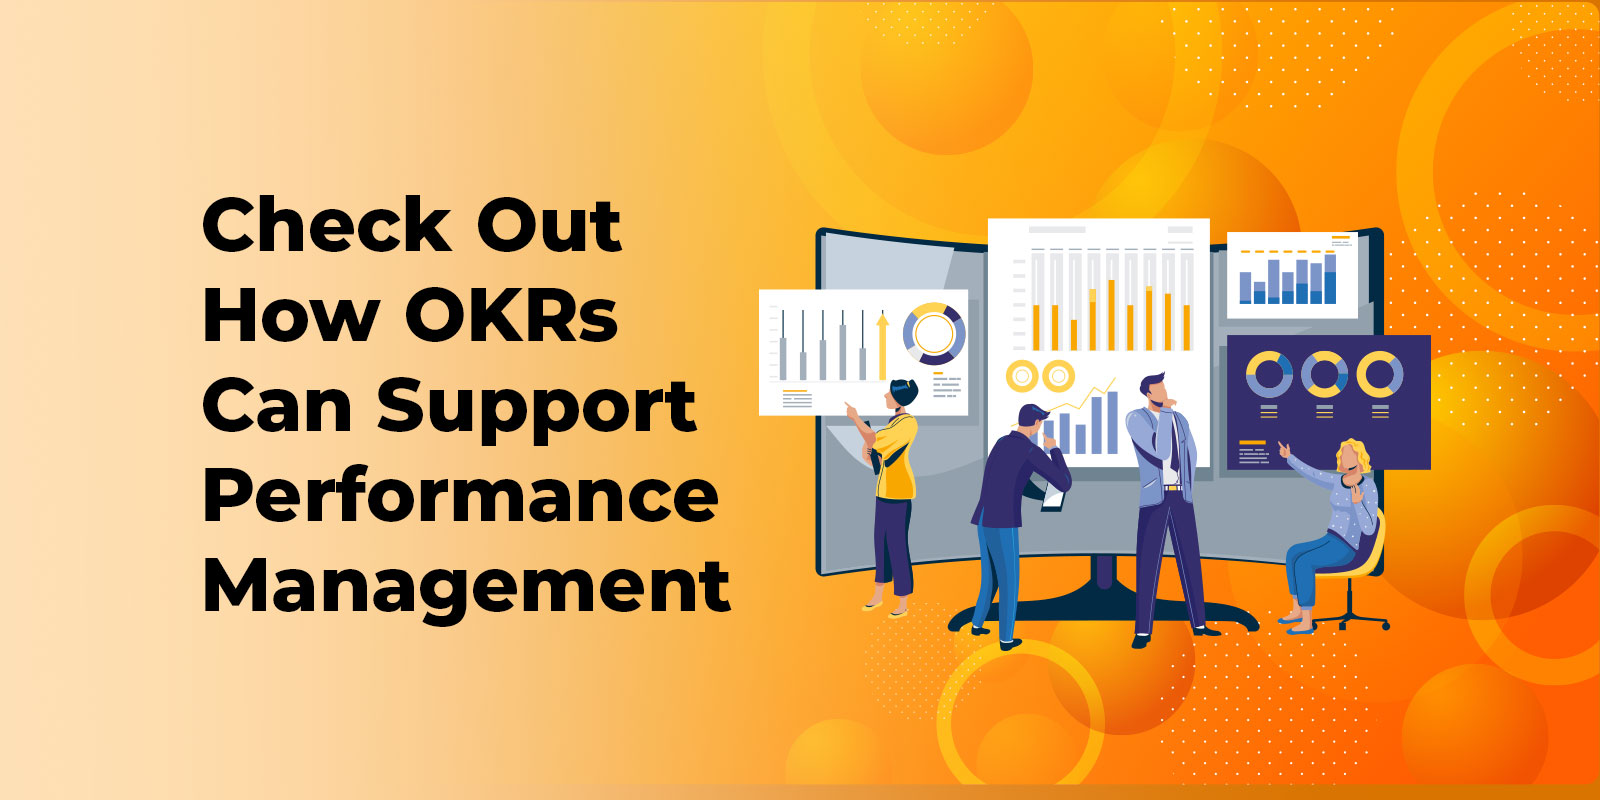 Check Out How OKRs Can Support Performance Management